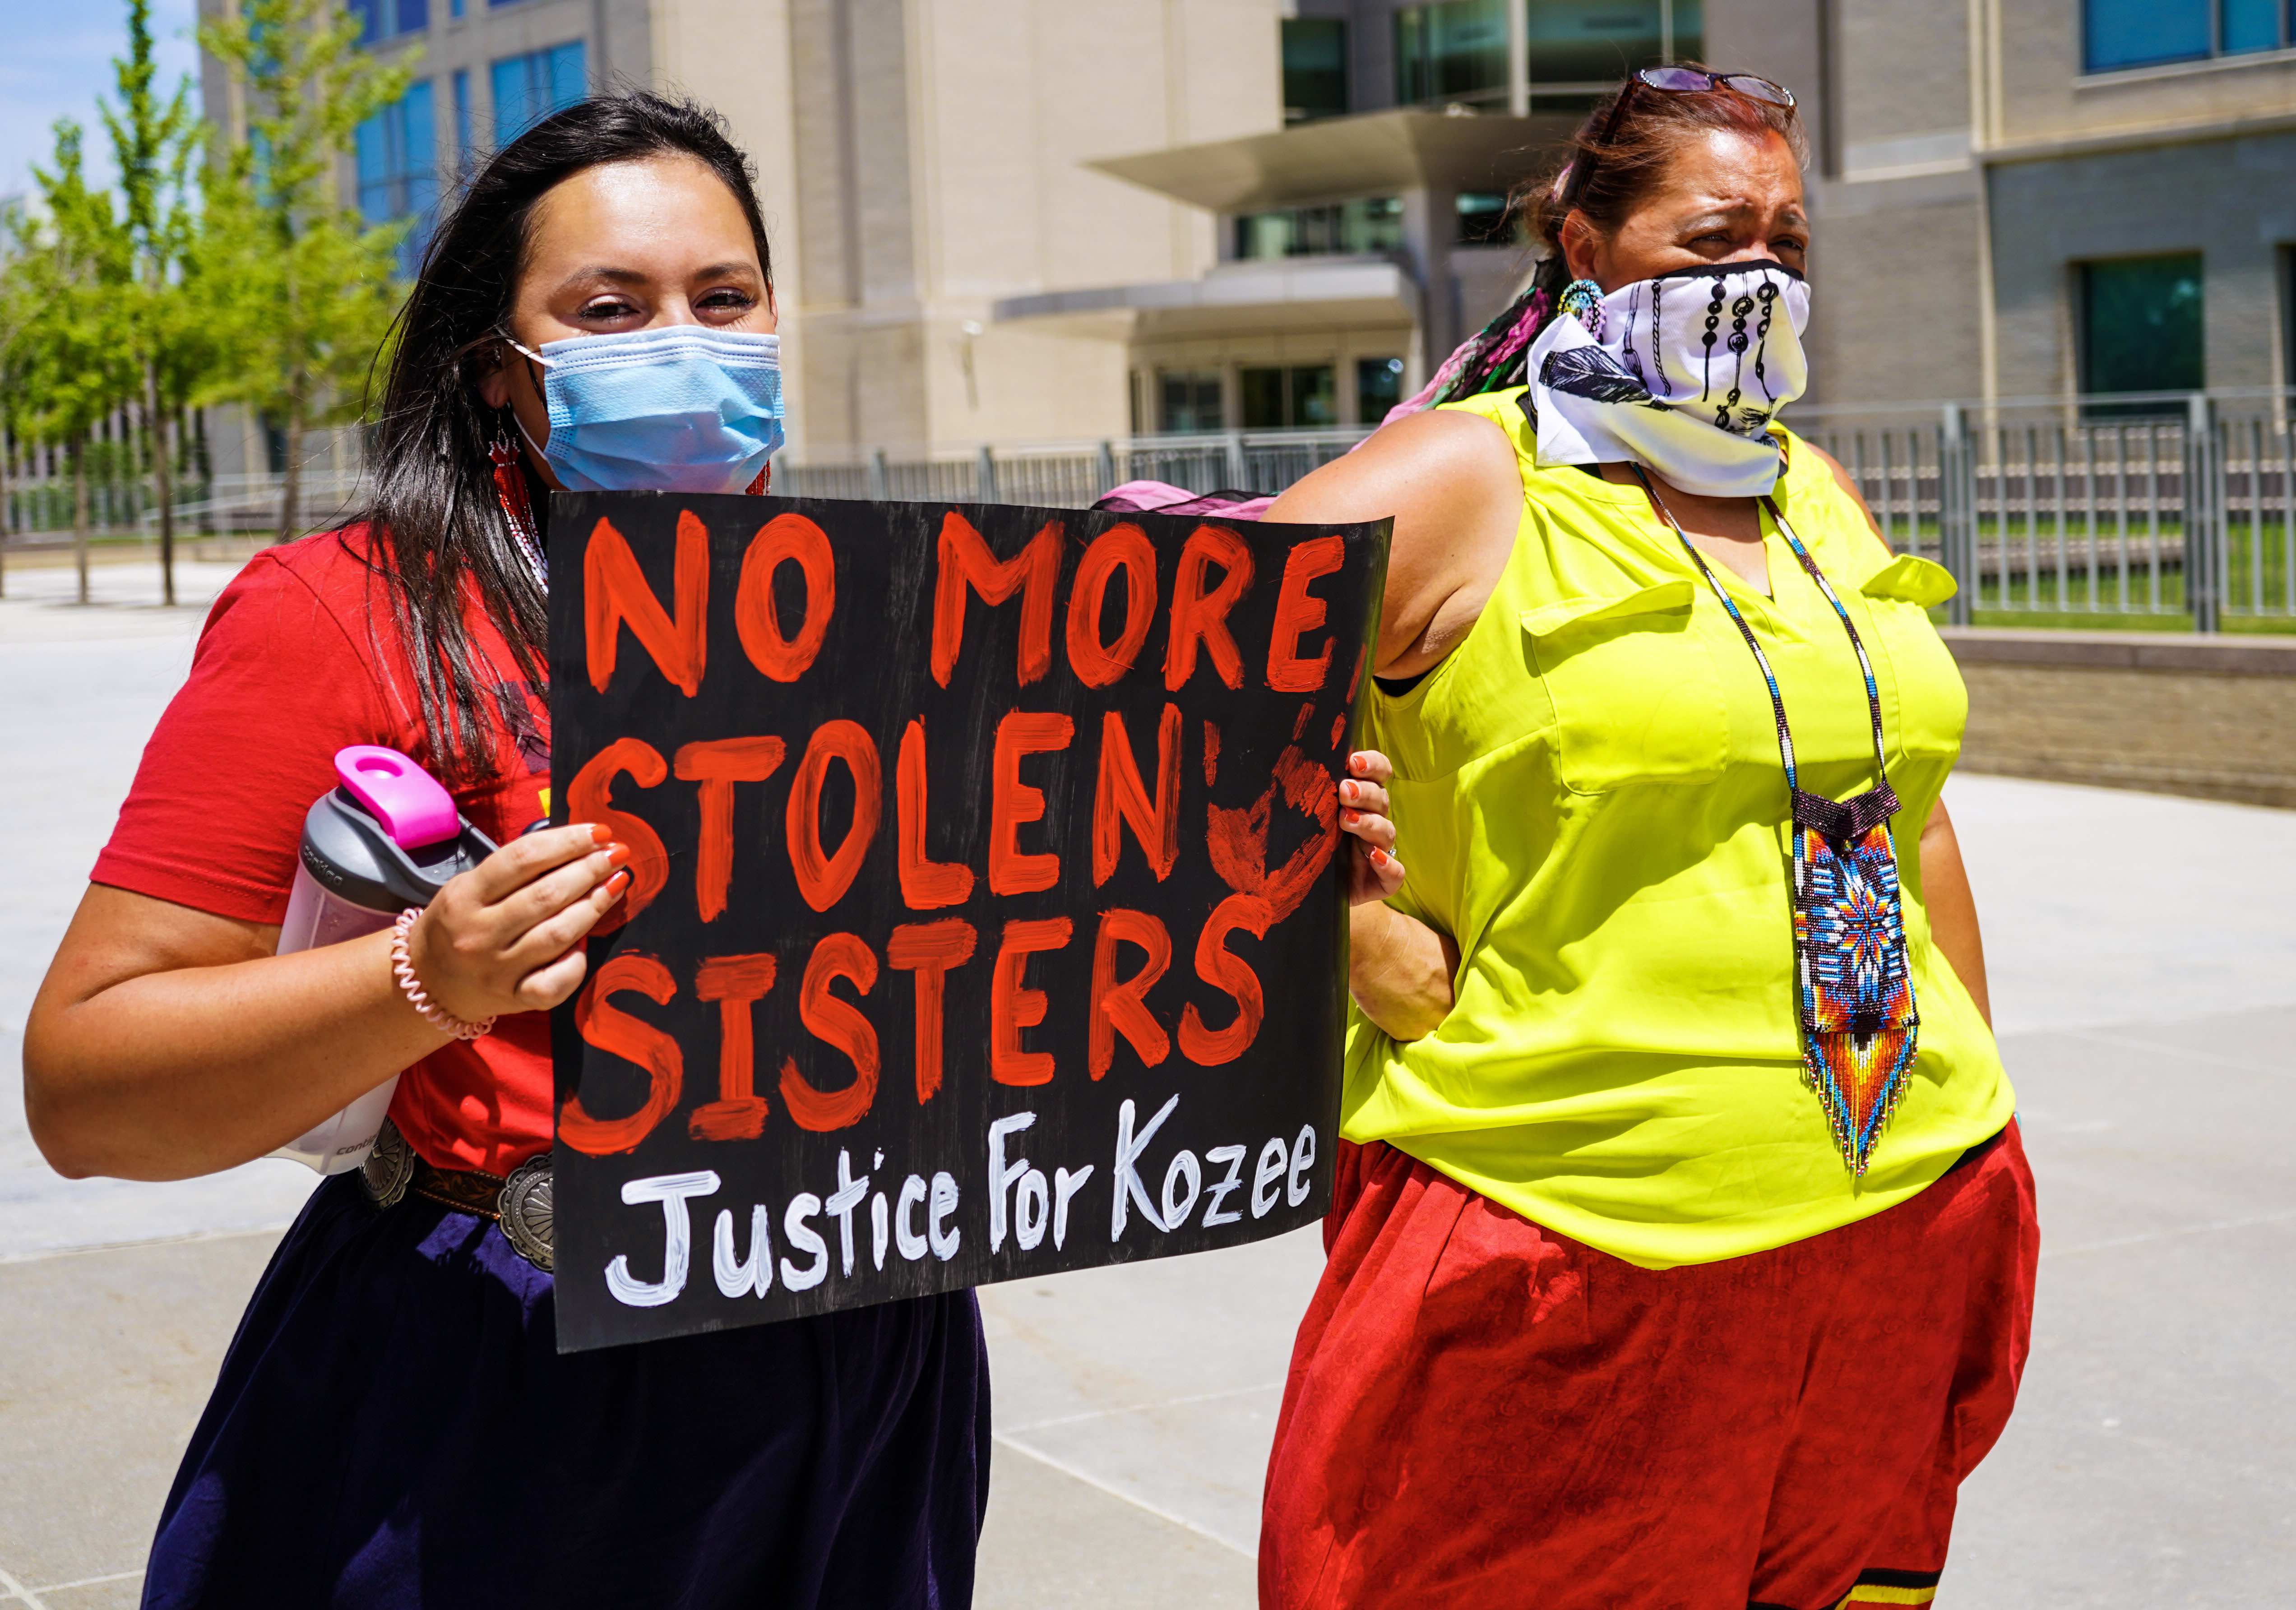 'Justice for Kozee!': Native women seek stronger charges for death of Kozee Decorah